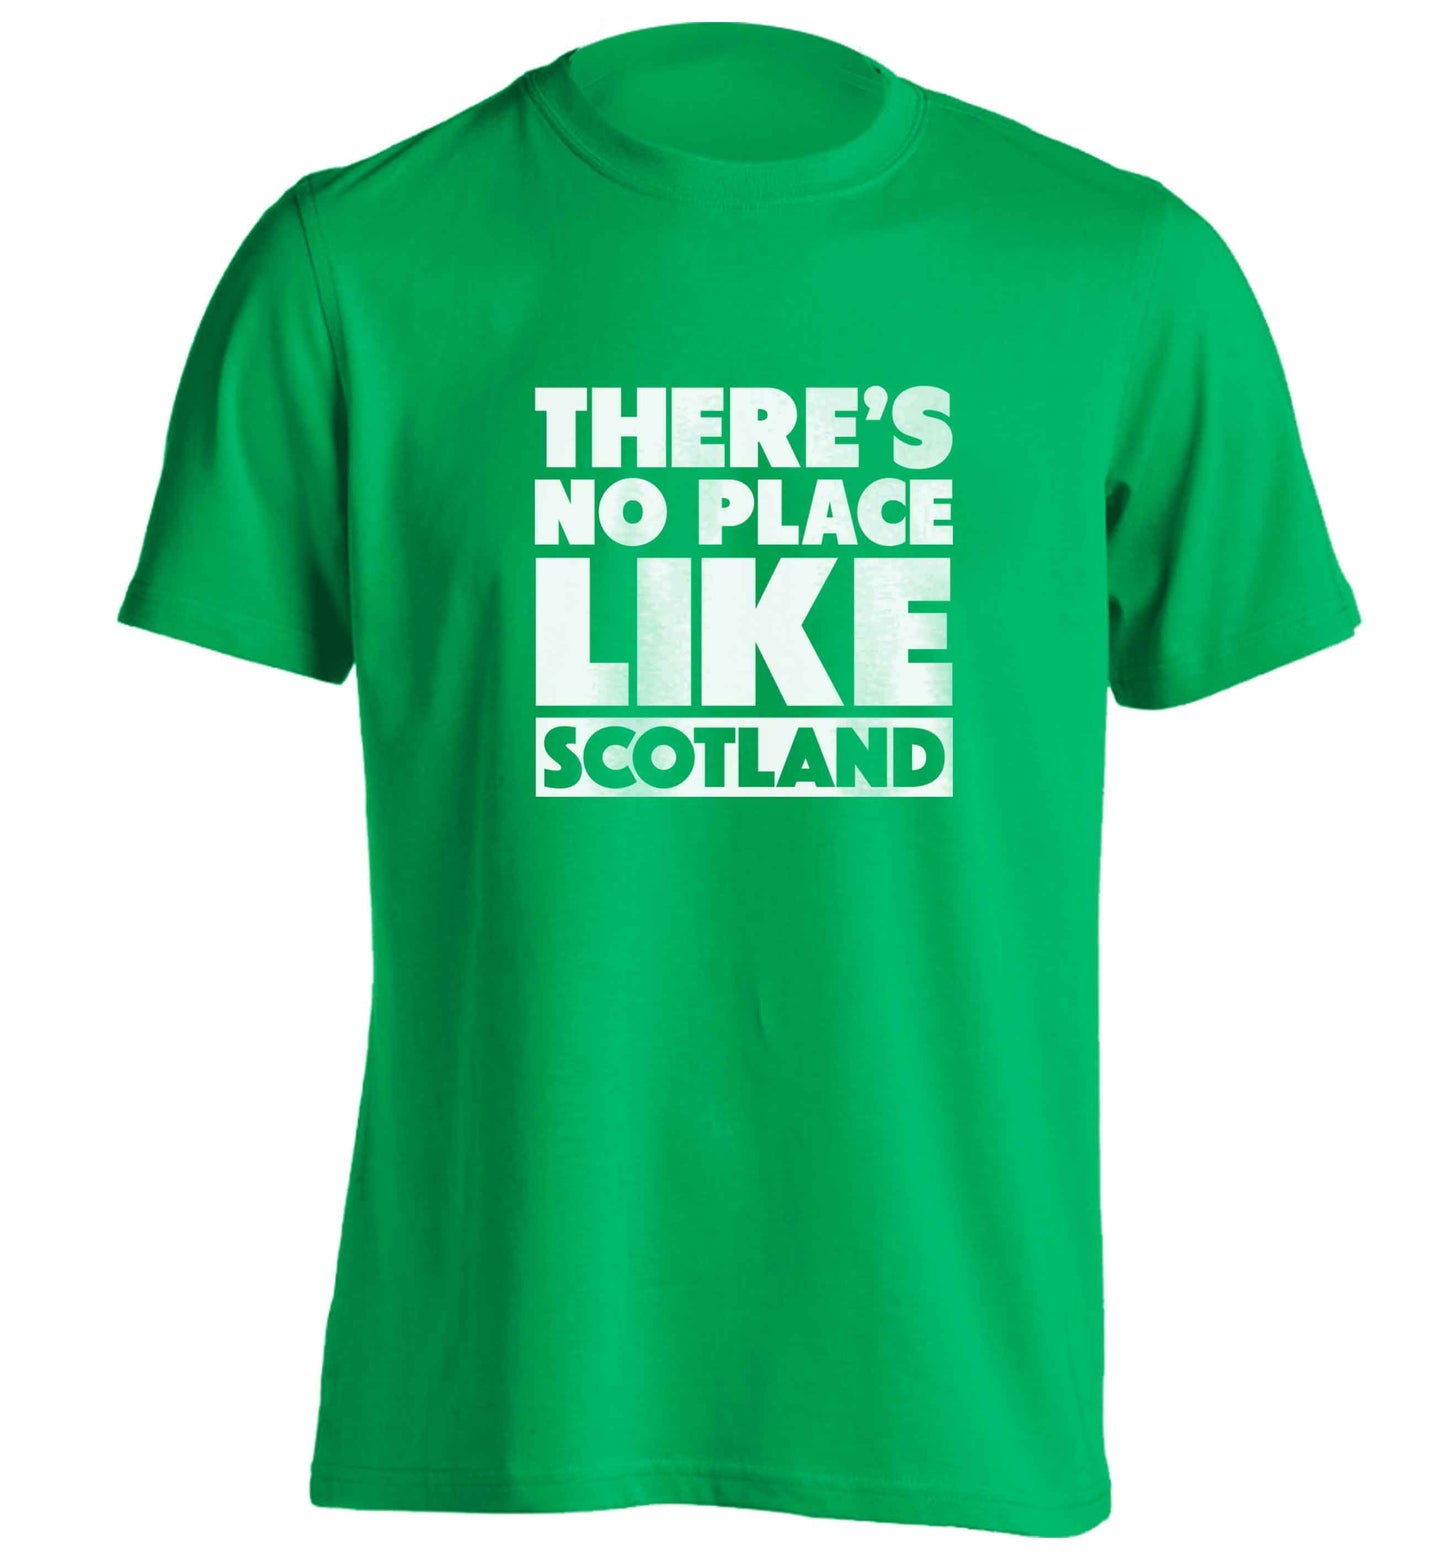 There's no place like Scotland adults unisex green Tshirt 2XL